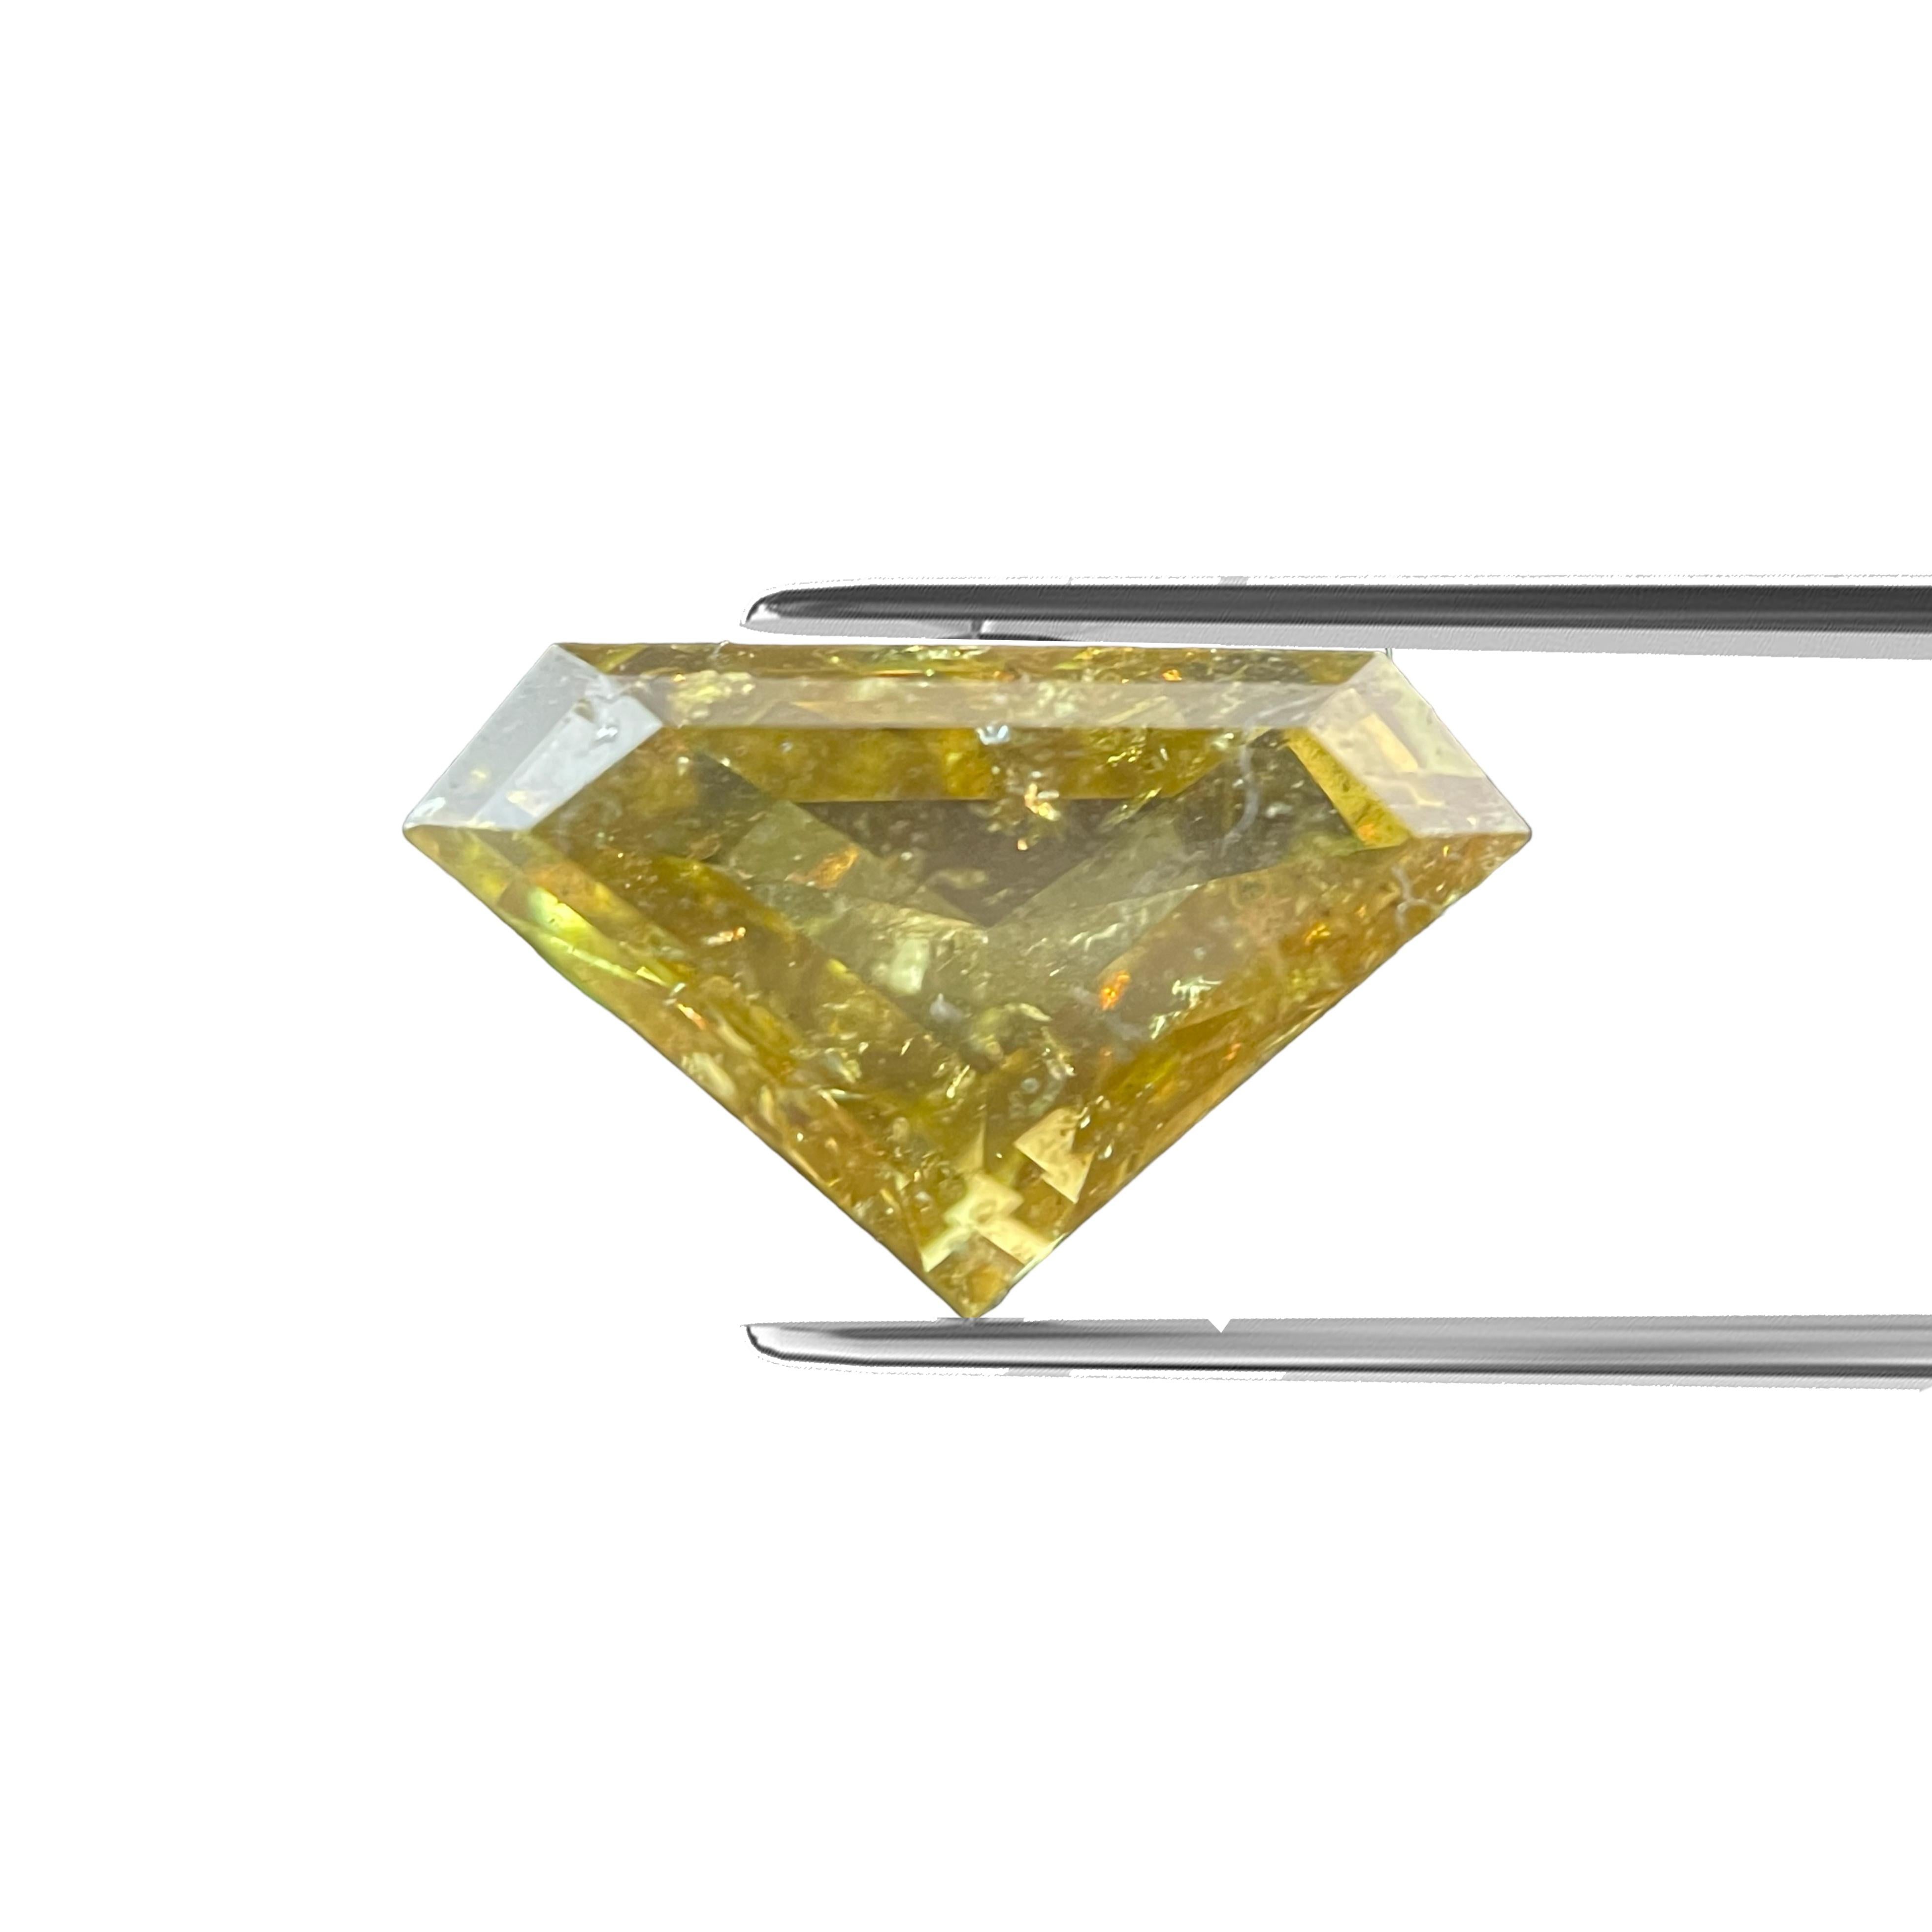 ITEM DESCRIPTION

ID #:	NYC56544
Stone Shape: MODIFIED SHIELD STEP CUT
Diamond Weight: 1.49 CT
Color:	FANCY DARK BROWN-GREENISH YELLOW
Cut:	Excellent
Measurements: 6.14 x 10.22 x 3.30 mm
Symmetry: Very
Polish: Very Good
Fluorescence:	None
Certifying